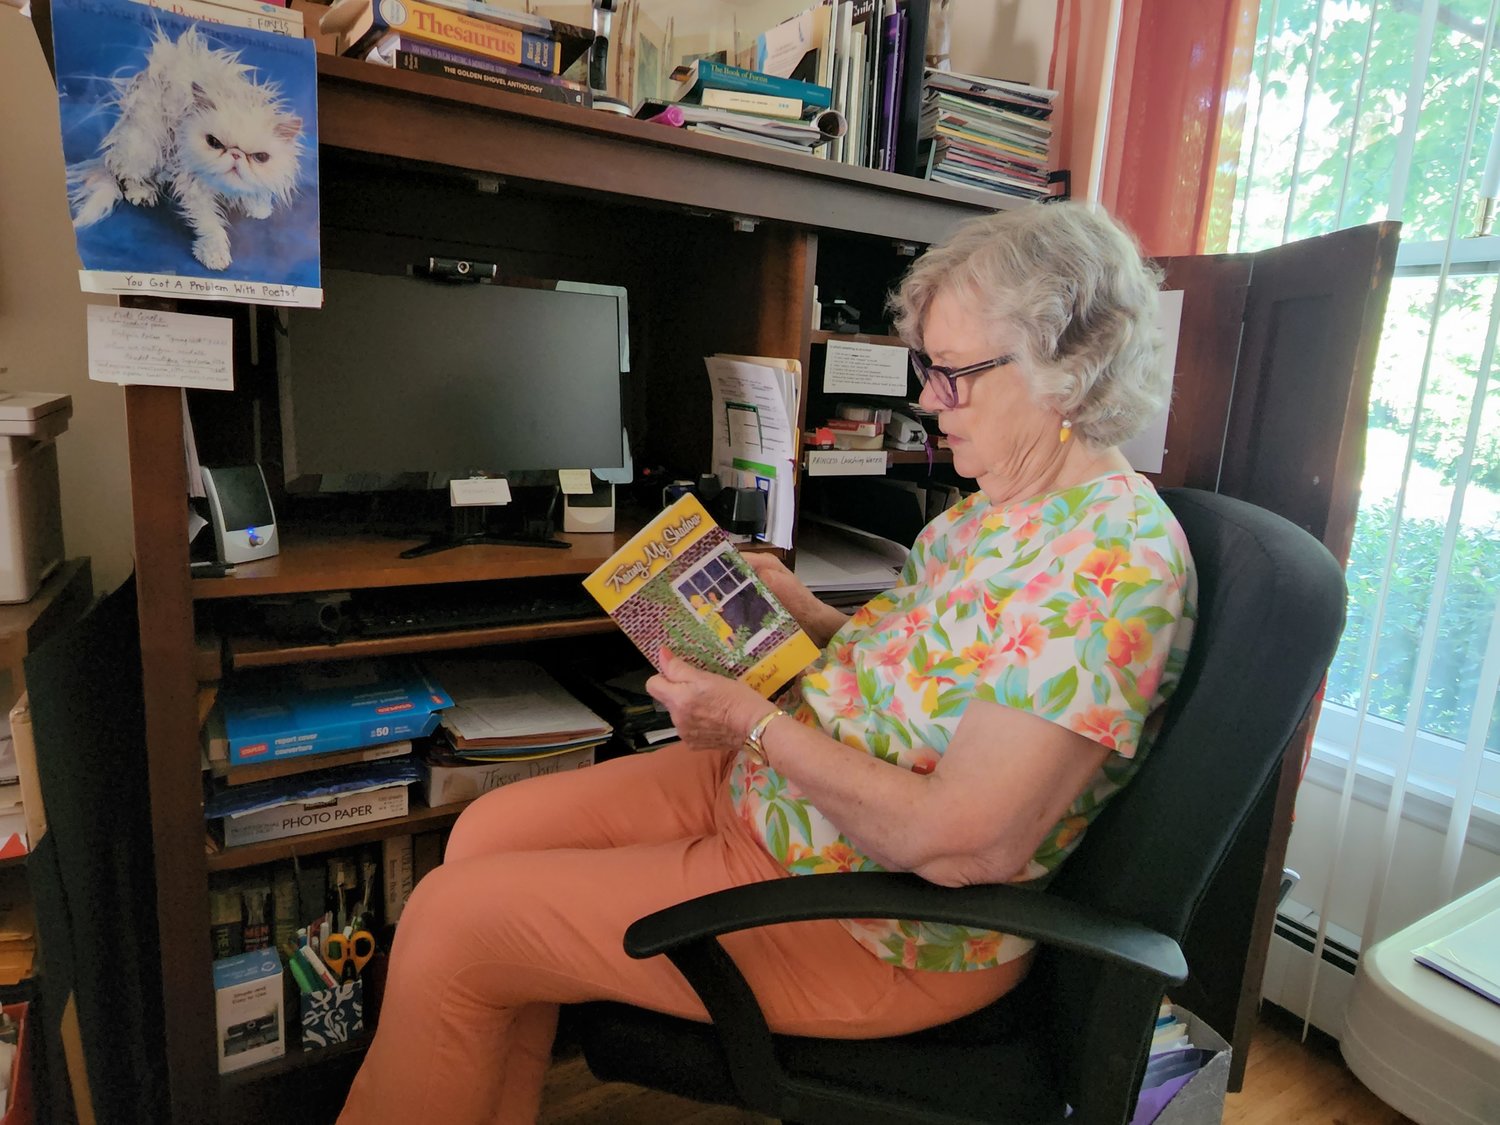 The former poet laureate often writes her poetry at her desk. Reading “Facing My Shadow,” a collection of her poems gives her inspiration to write other poems.